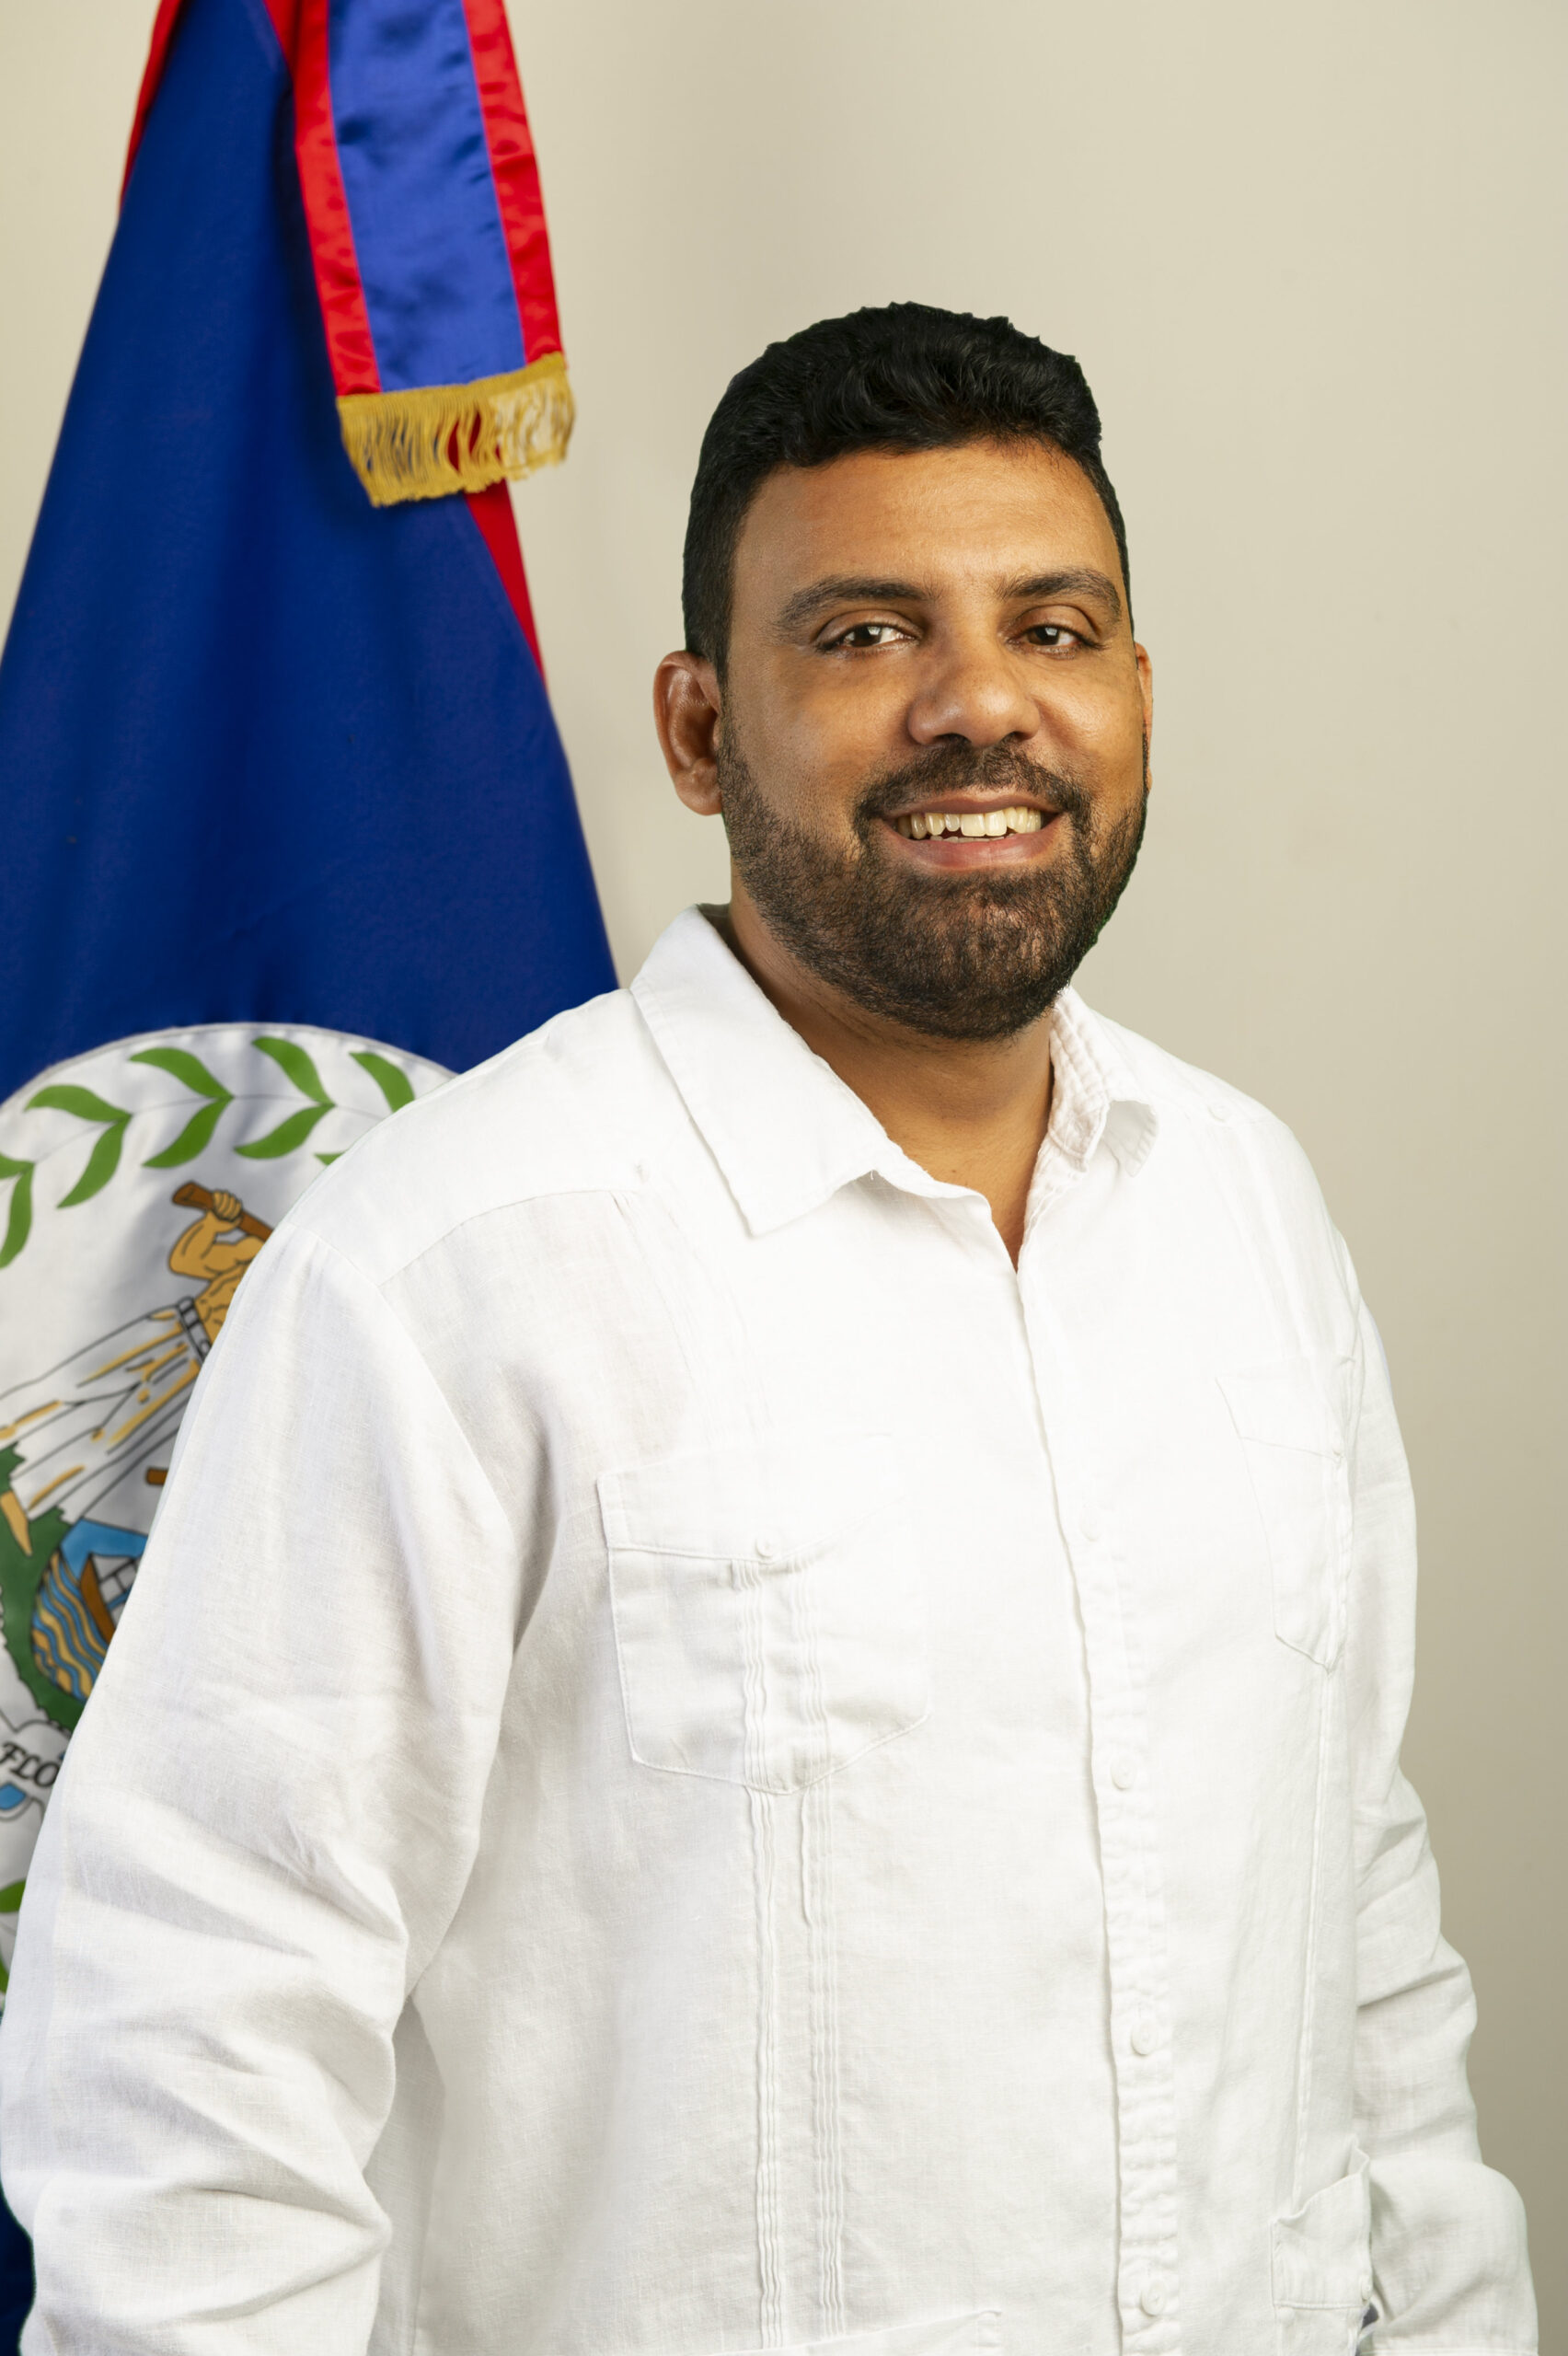 The House of Representatives – Government of Belize Press Office